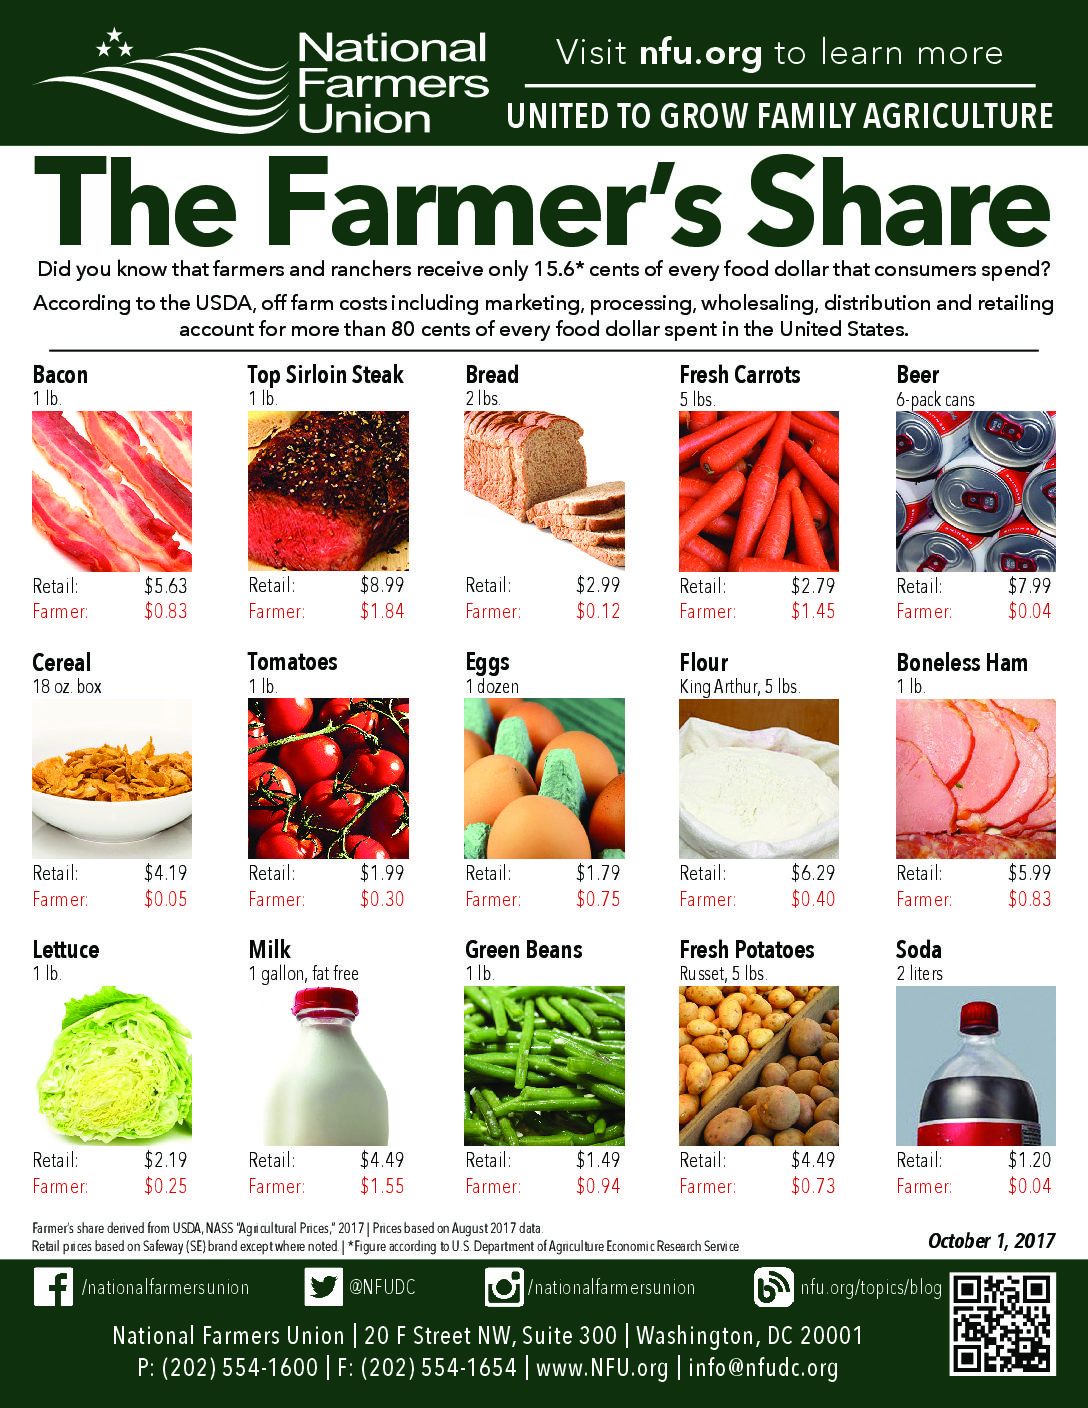 Farmers Receive Less Than Sixteen Cents of the American Food Dollar